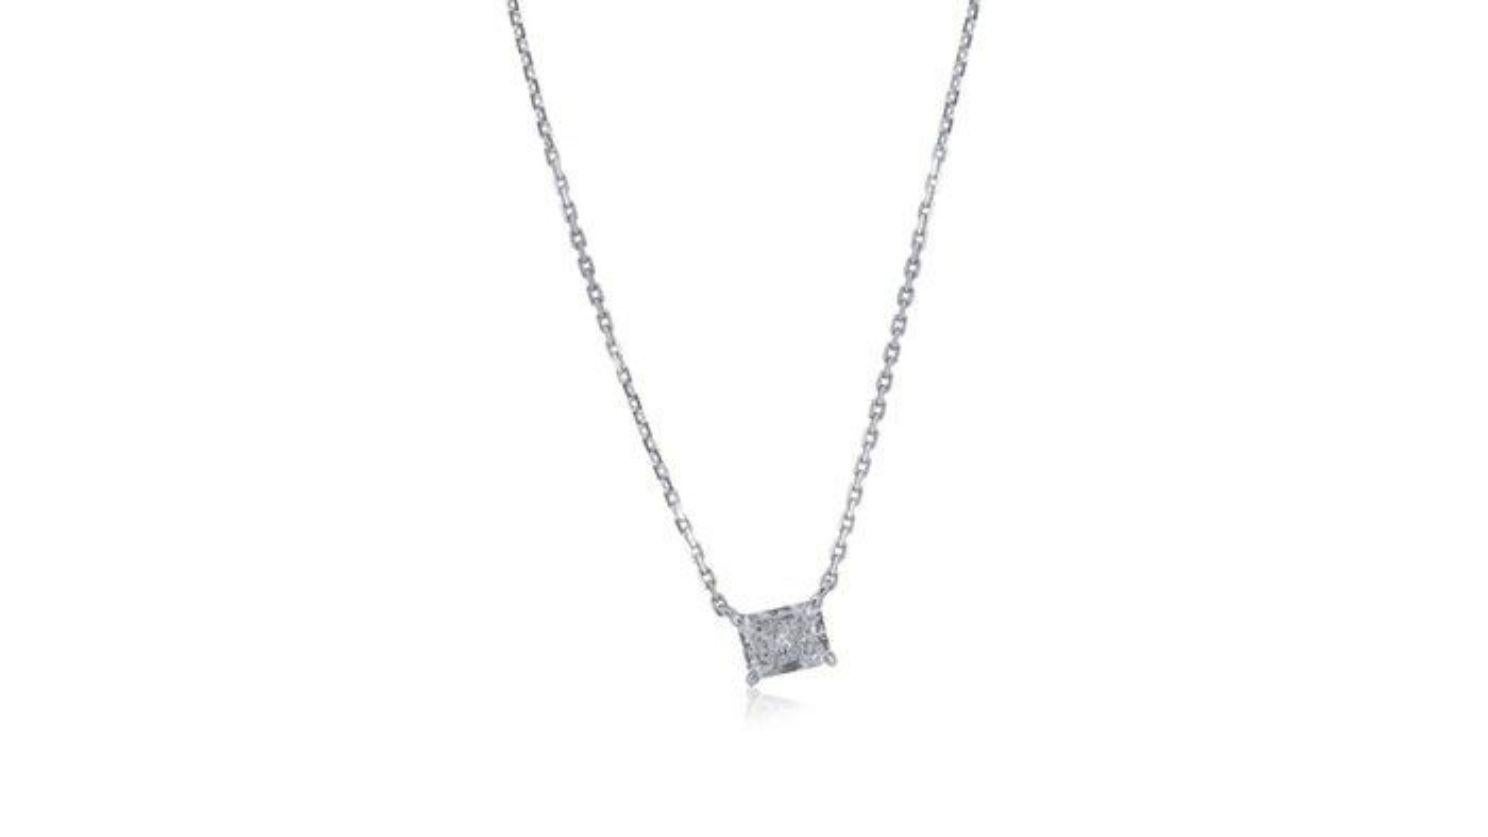 Radiant 0.90ct Solitaire Diamond Necklace set in 18K White Gold For Sale